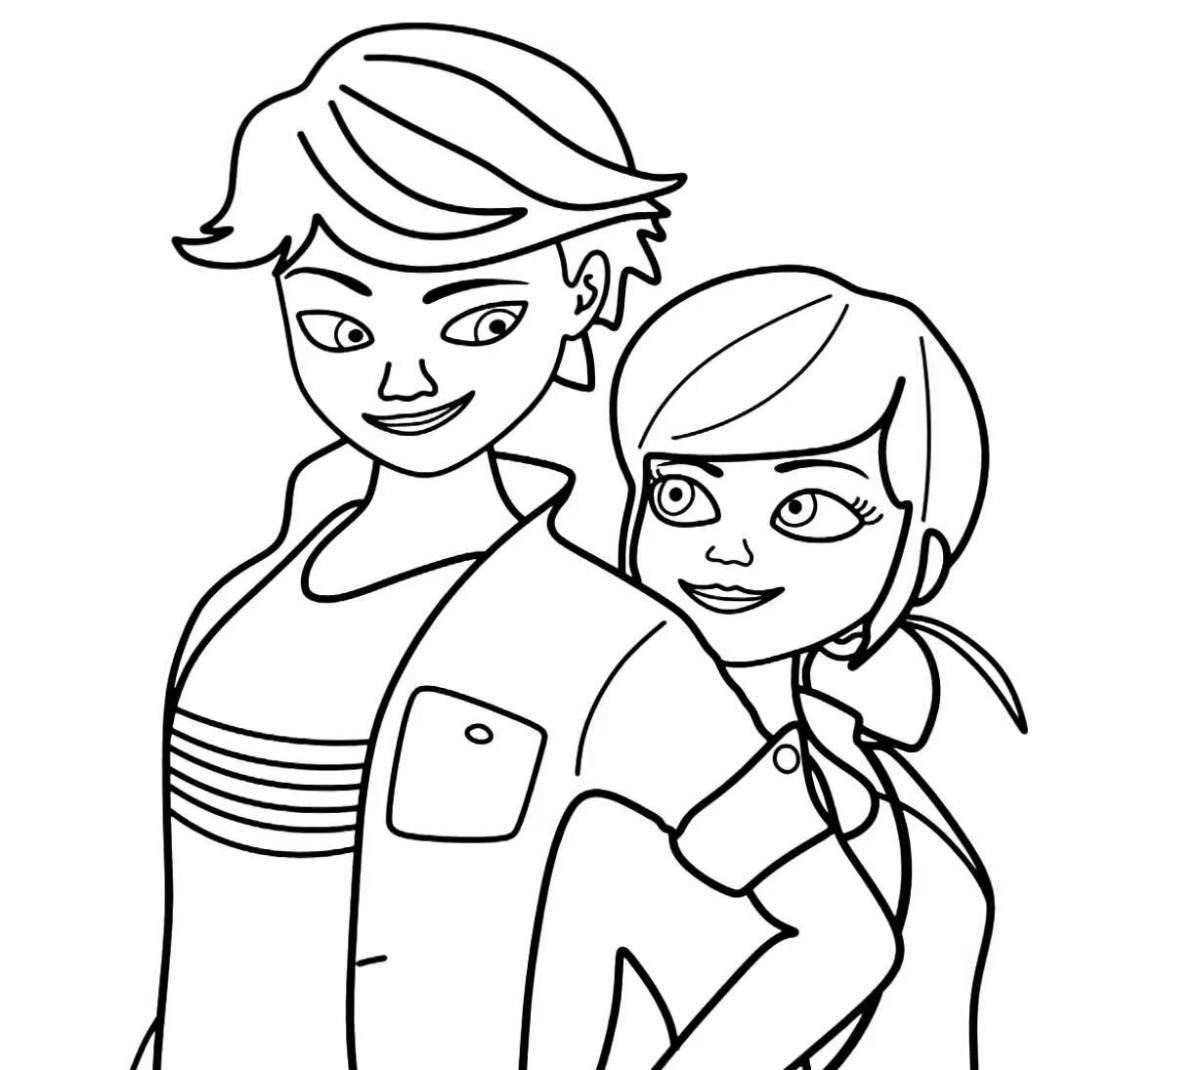 Coloring pages ladybug and marinette obsessed with flowers